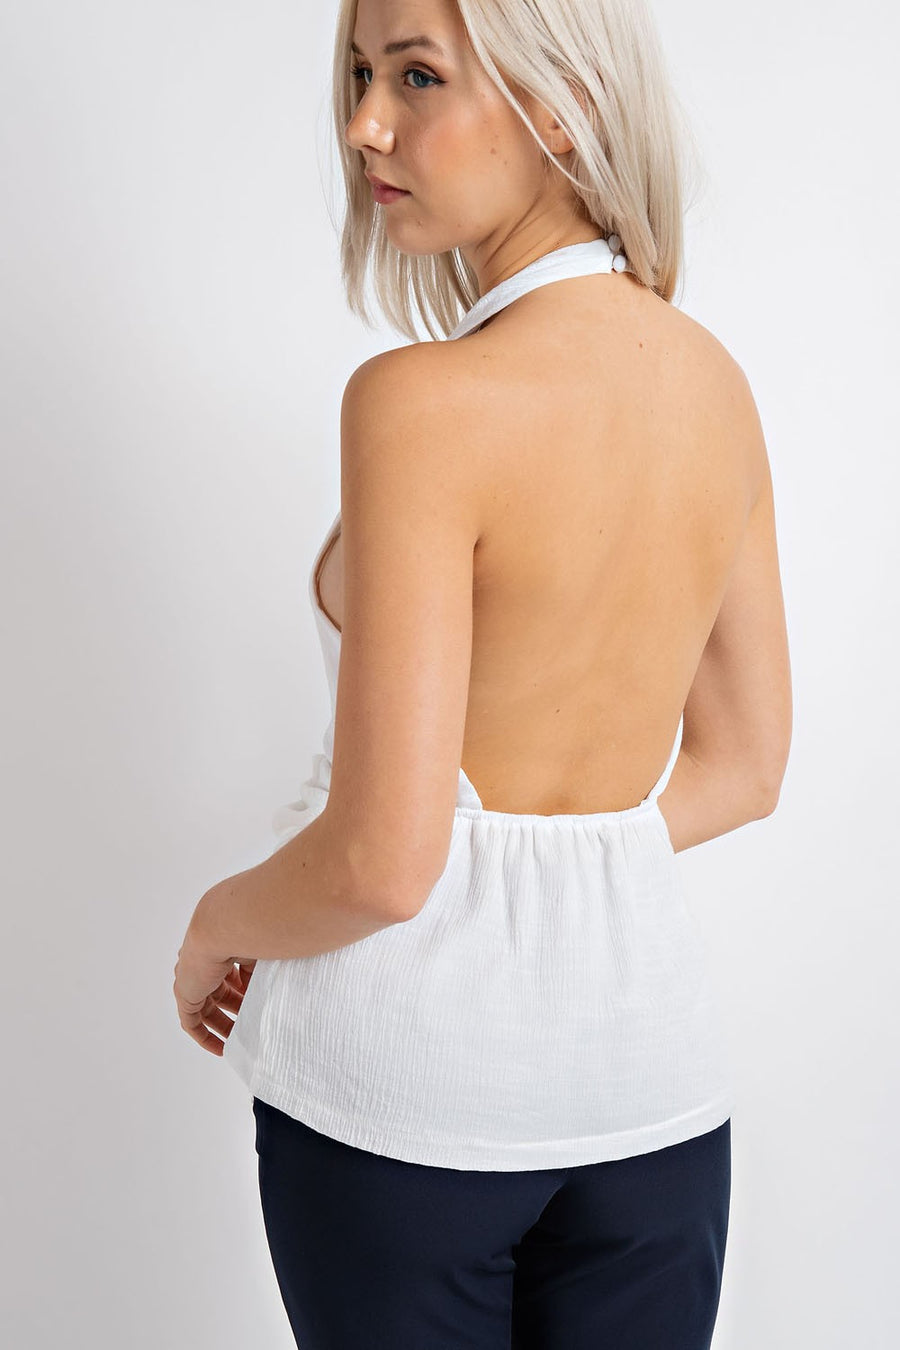 Sleeveless halter top with front knot detail.